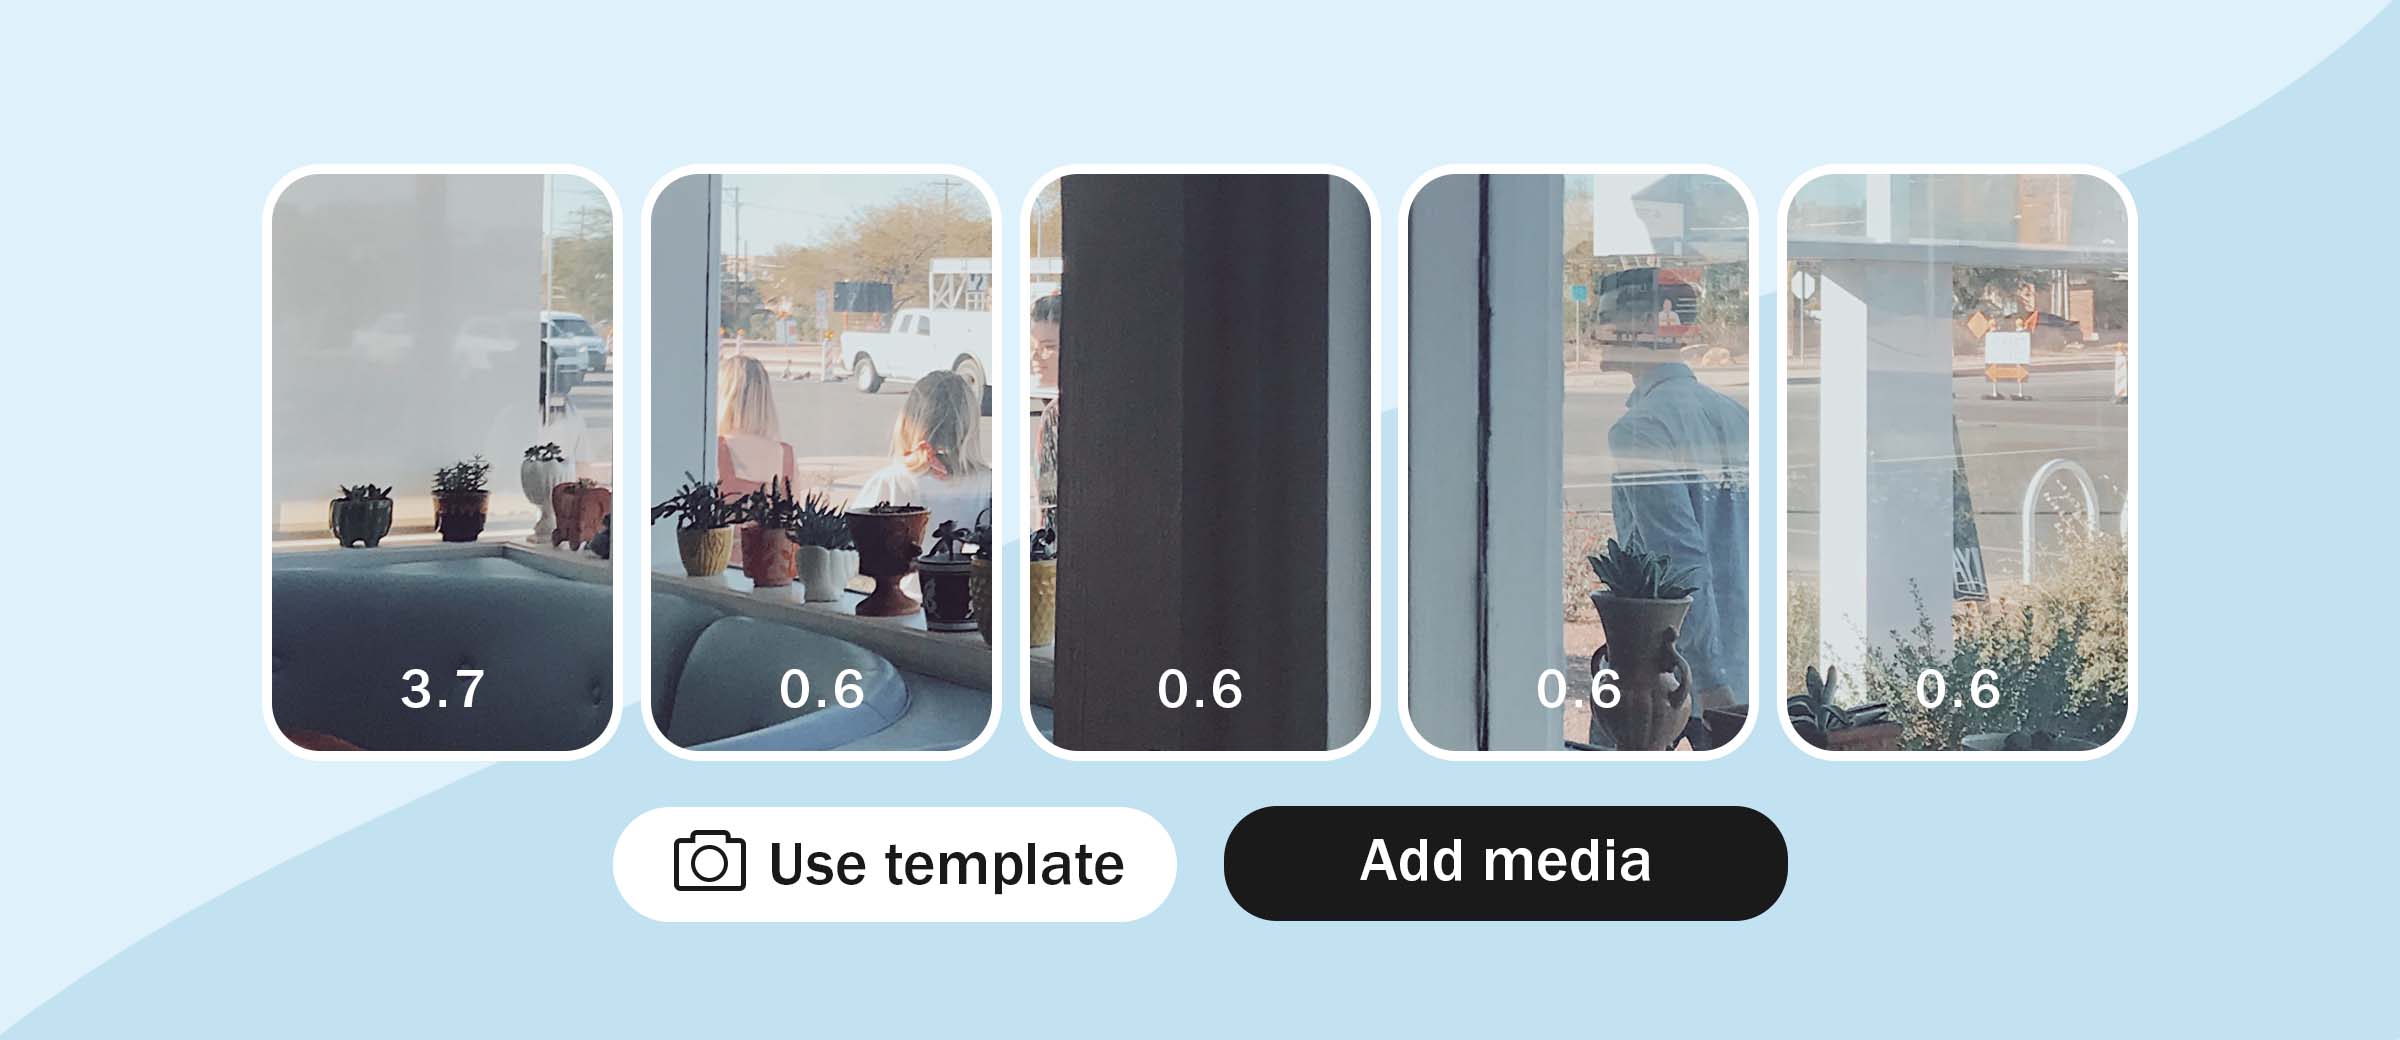 Instagram Reels Templates: How to Use This New Feature